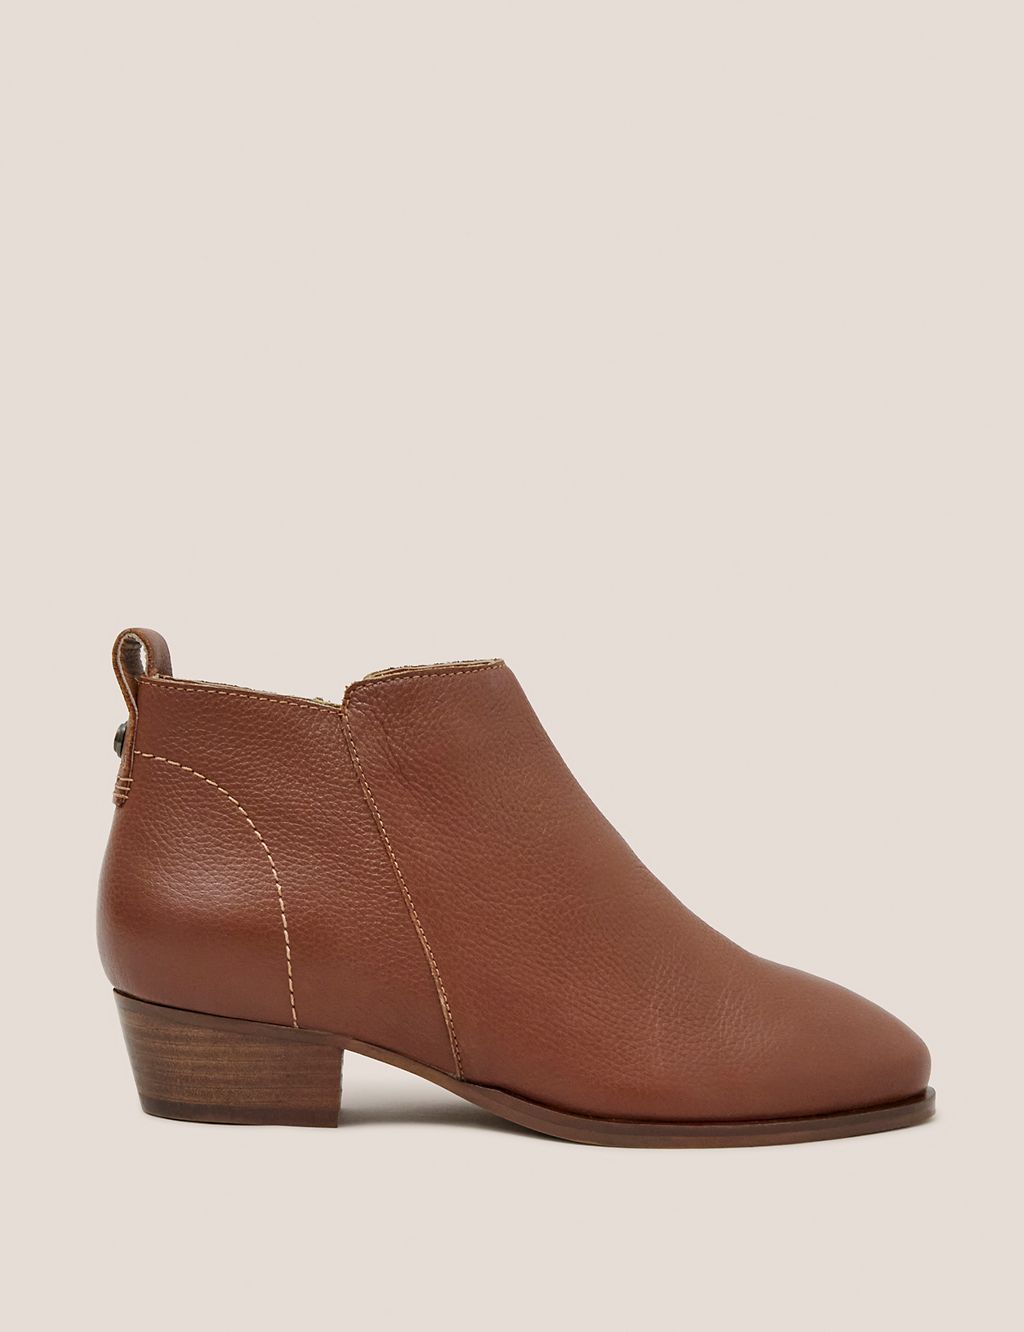 Leather Block Heel Ankle Boots 3 of 3